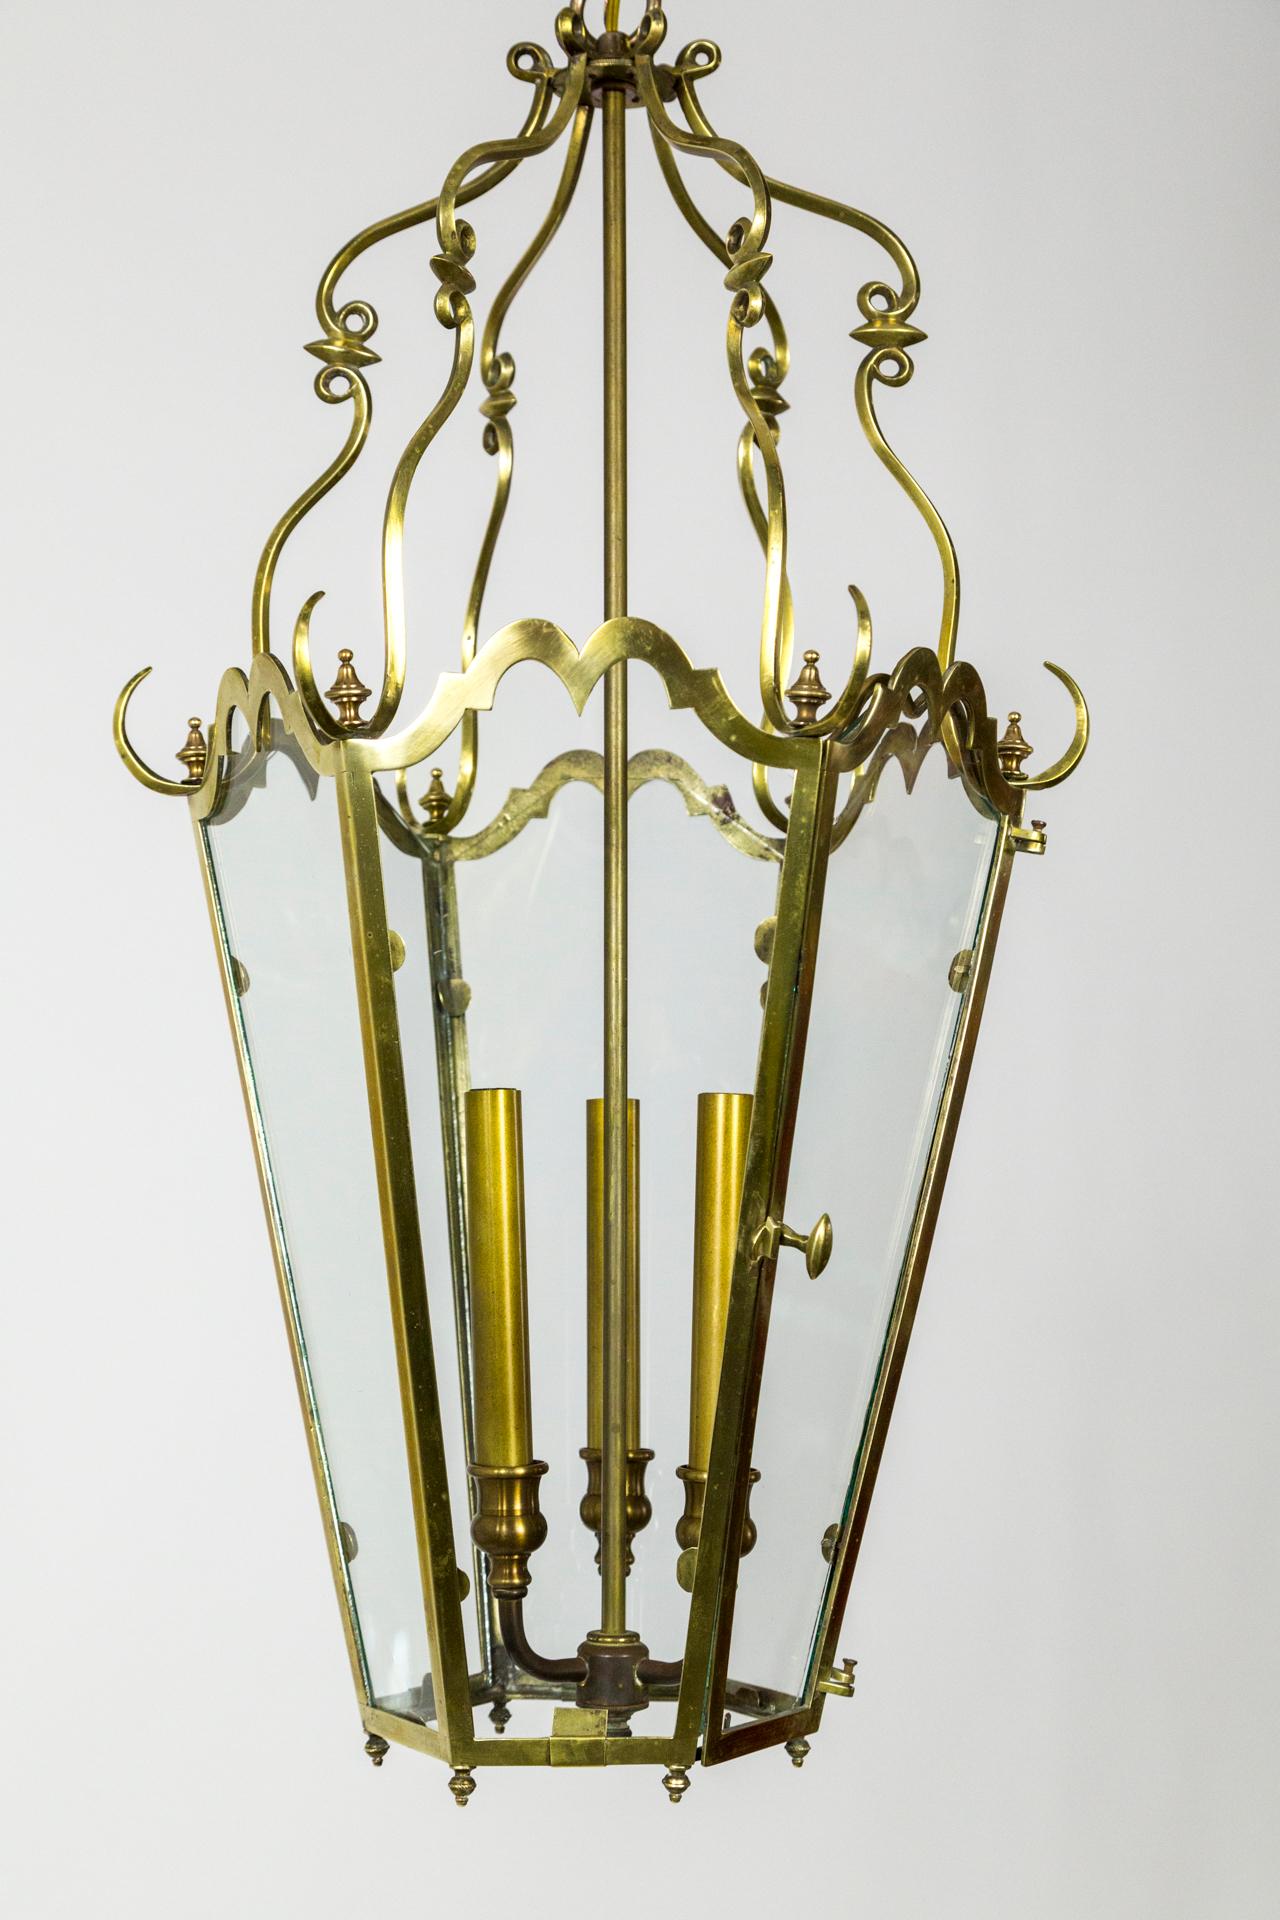 An elegantly decorative six-panel, 3-light glass and brass lantern. French origin - Belle Époque style. Each glass panel topped in an amazingly shaped brass frame with an even more wonderful birdcage type headdress. France, 1920s. Measures: 29